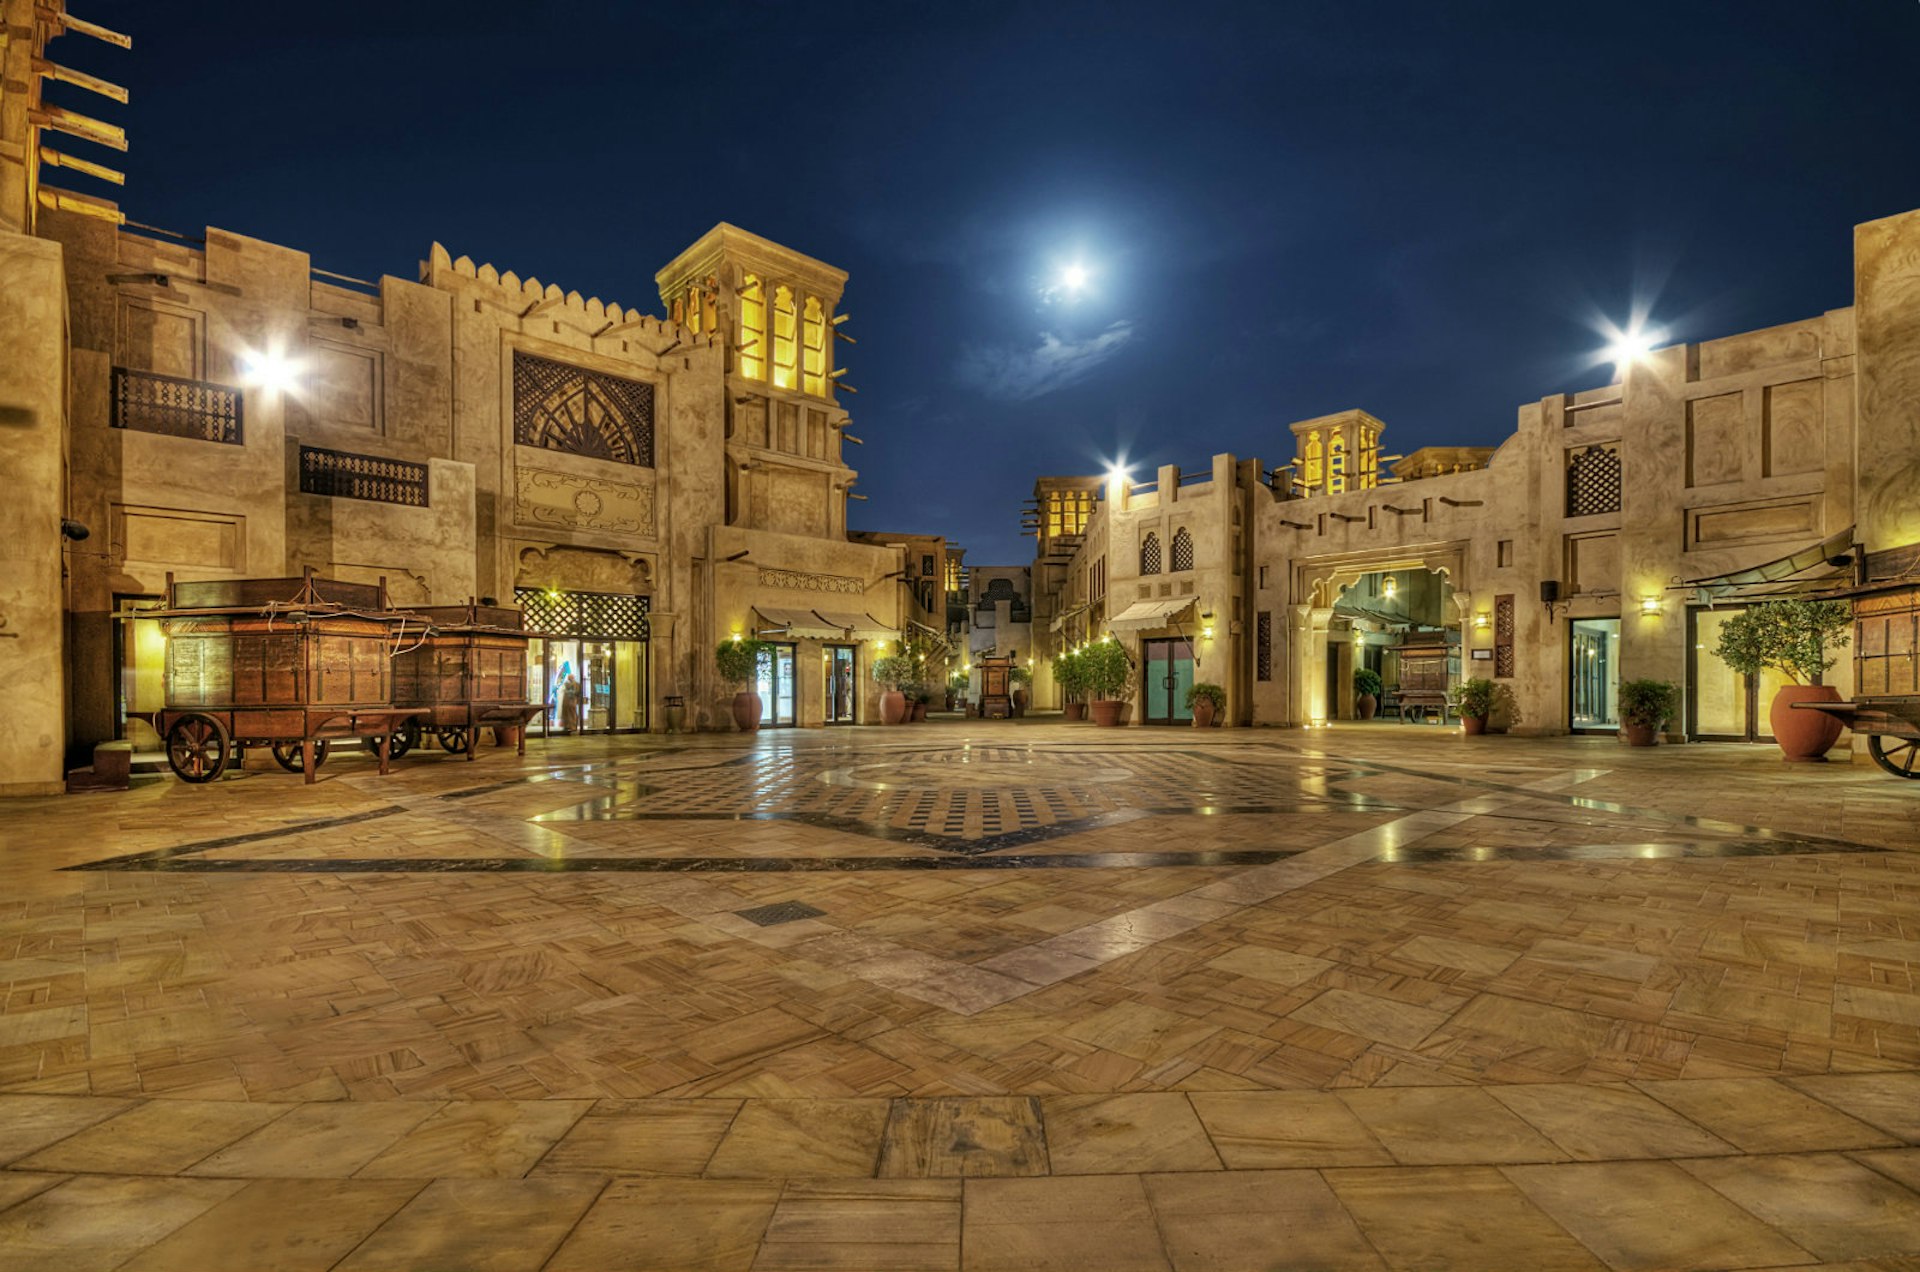 The moon rises over a darkened square in Dubai, United Arab Emirates. Th ground is elaborately tiled and there are wooden carts outside old-fashioned shop fronts. 